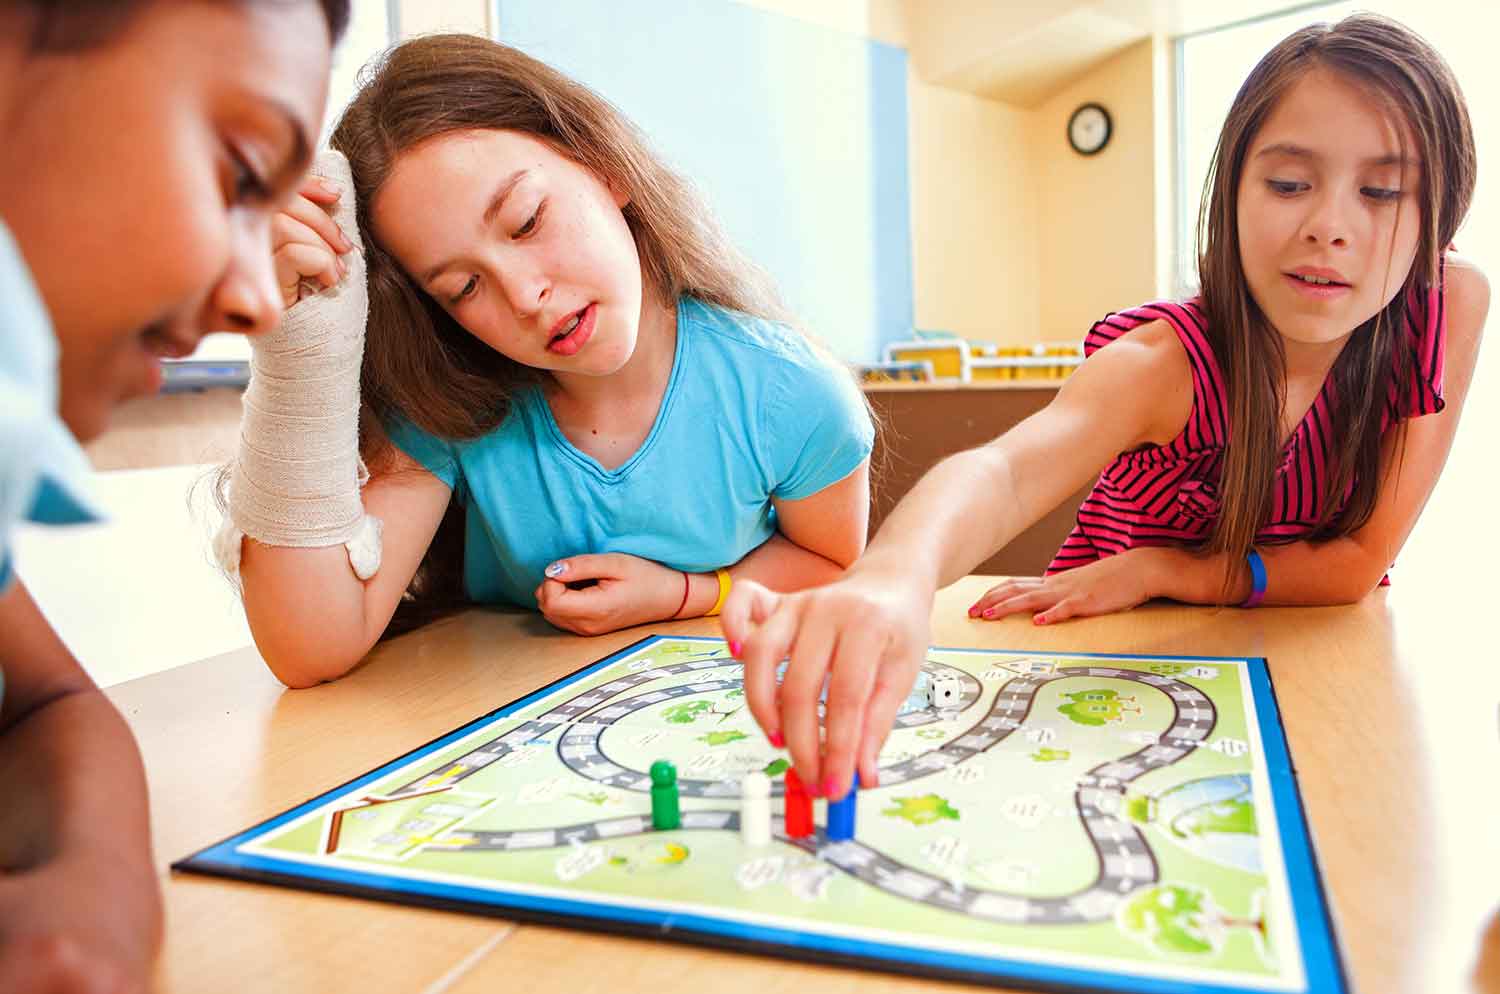 Three elementary school kids sit at a table playing a board game.